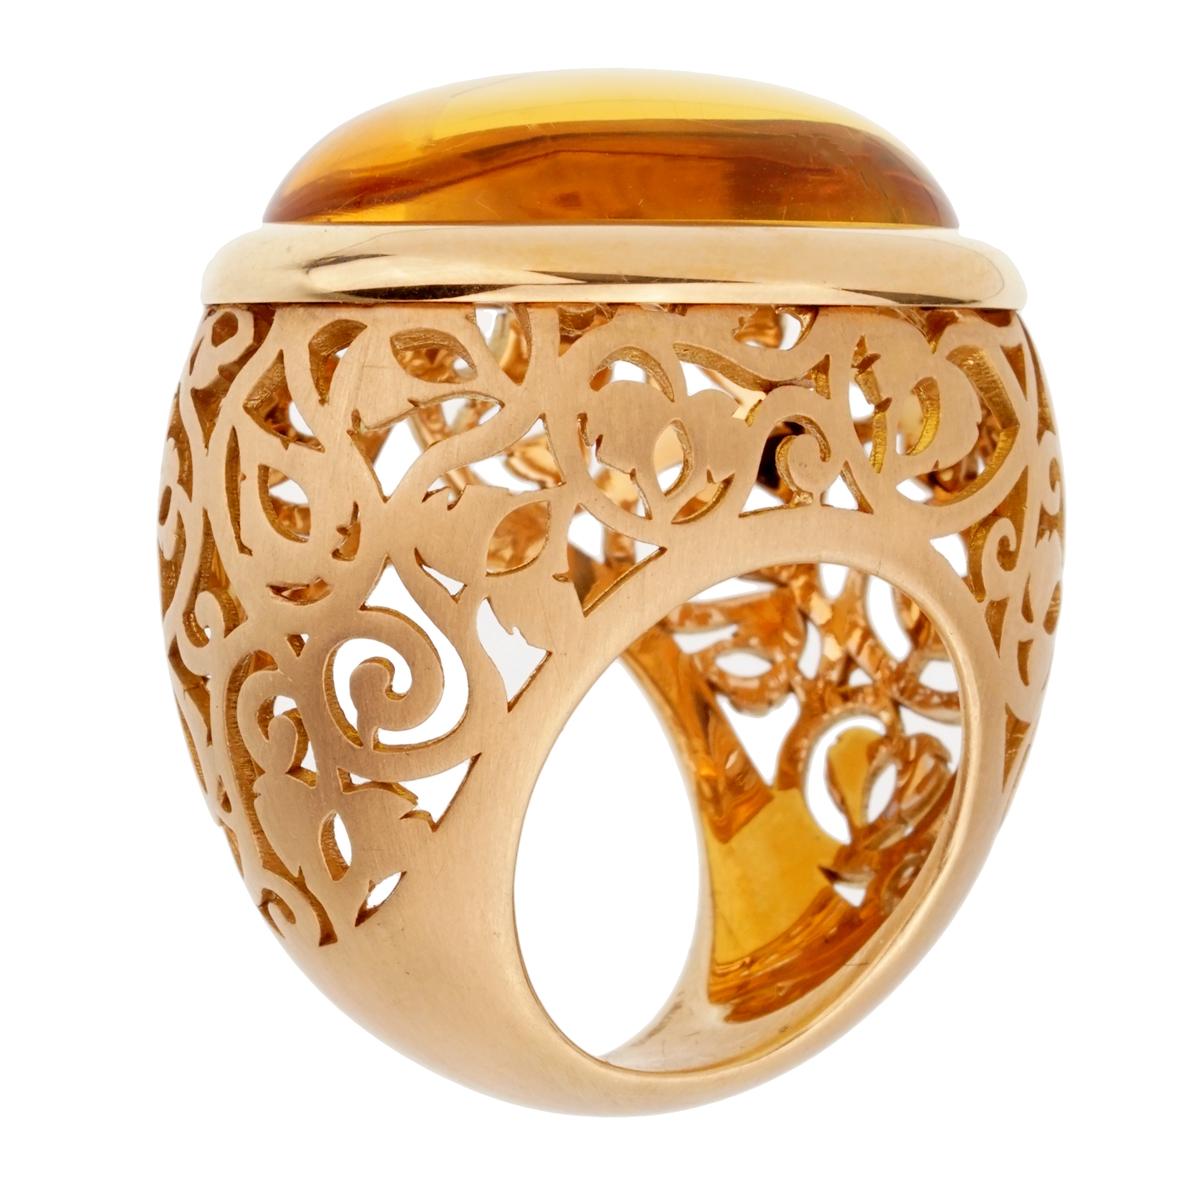 A magnificent brand new Pomellato rose gold cocktail ring showcasing a 19.94ct cabochon Amber. The ring measures a size 5 and can be resized.

Pomellato Retail Price: $7,800
Sku: 2316